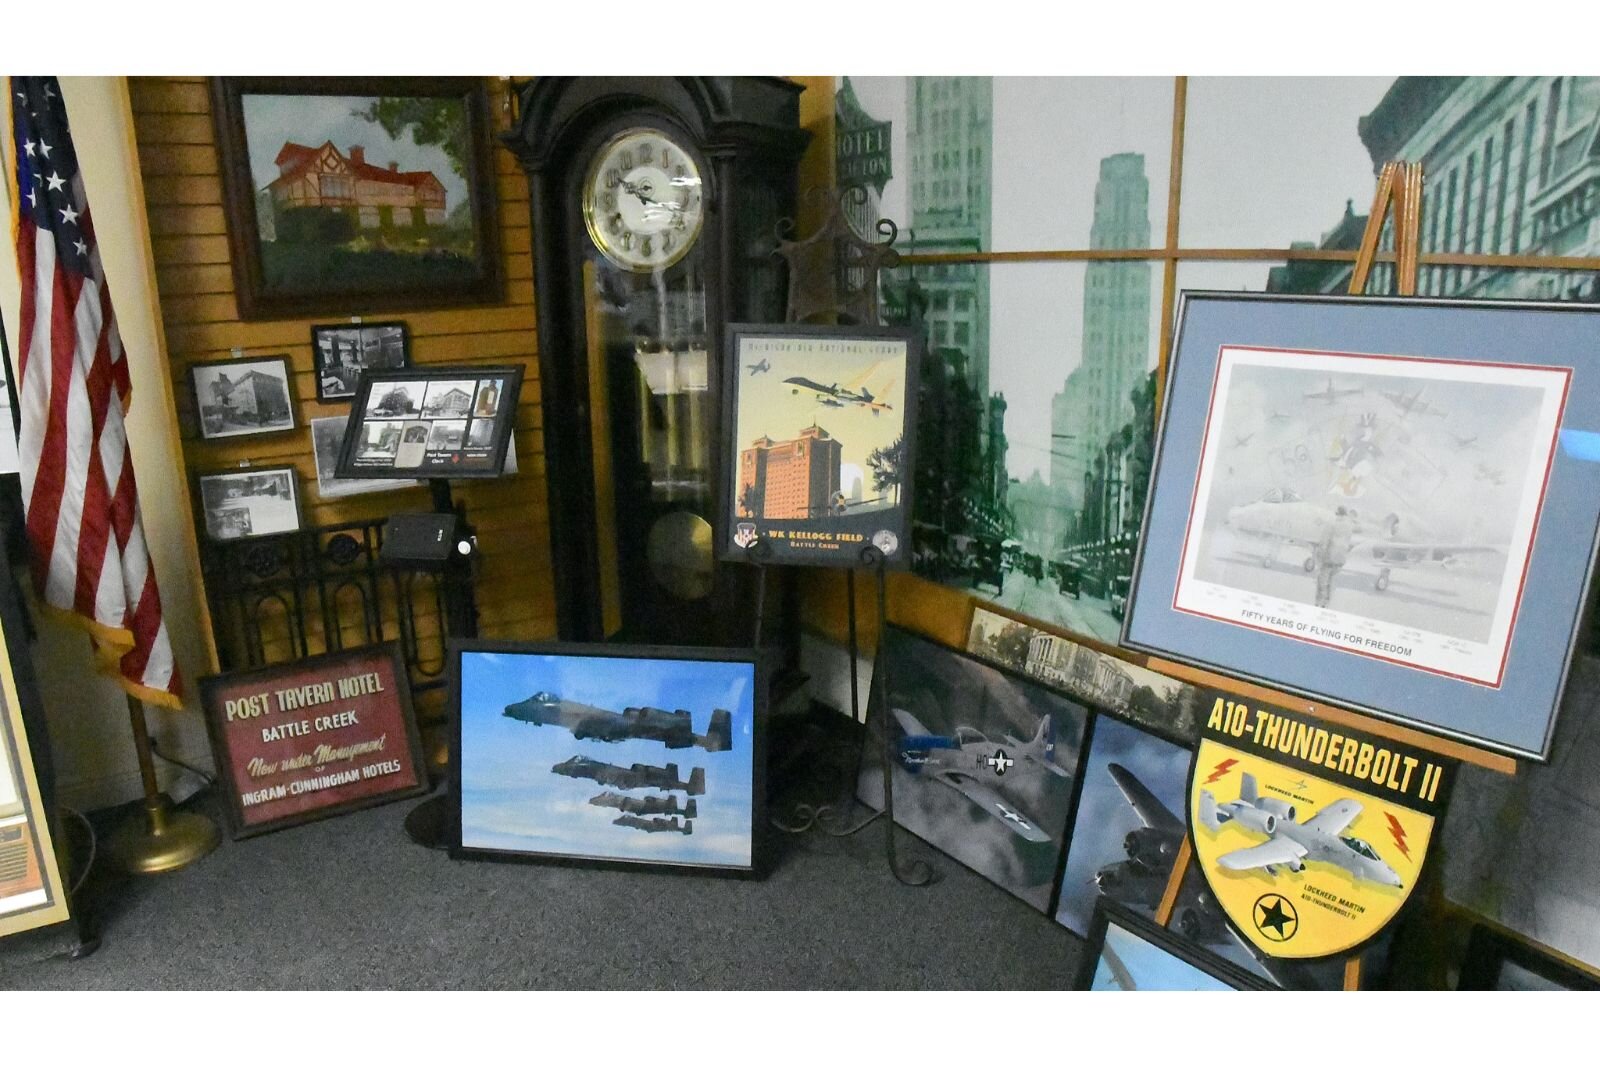 A corner display in the Battle Creek Regional History Museum shows some of the military aircraft formerly based in Battle Creek.